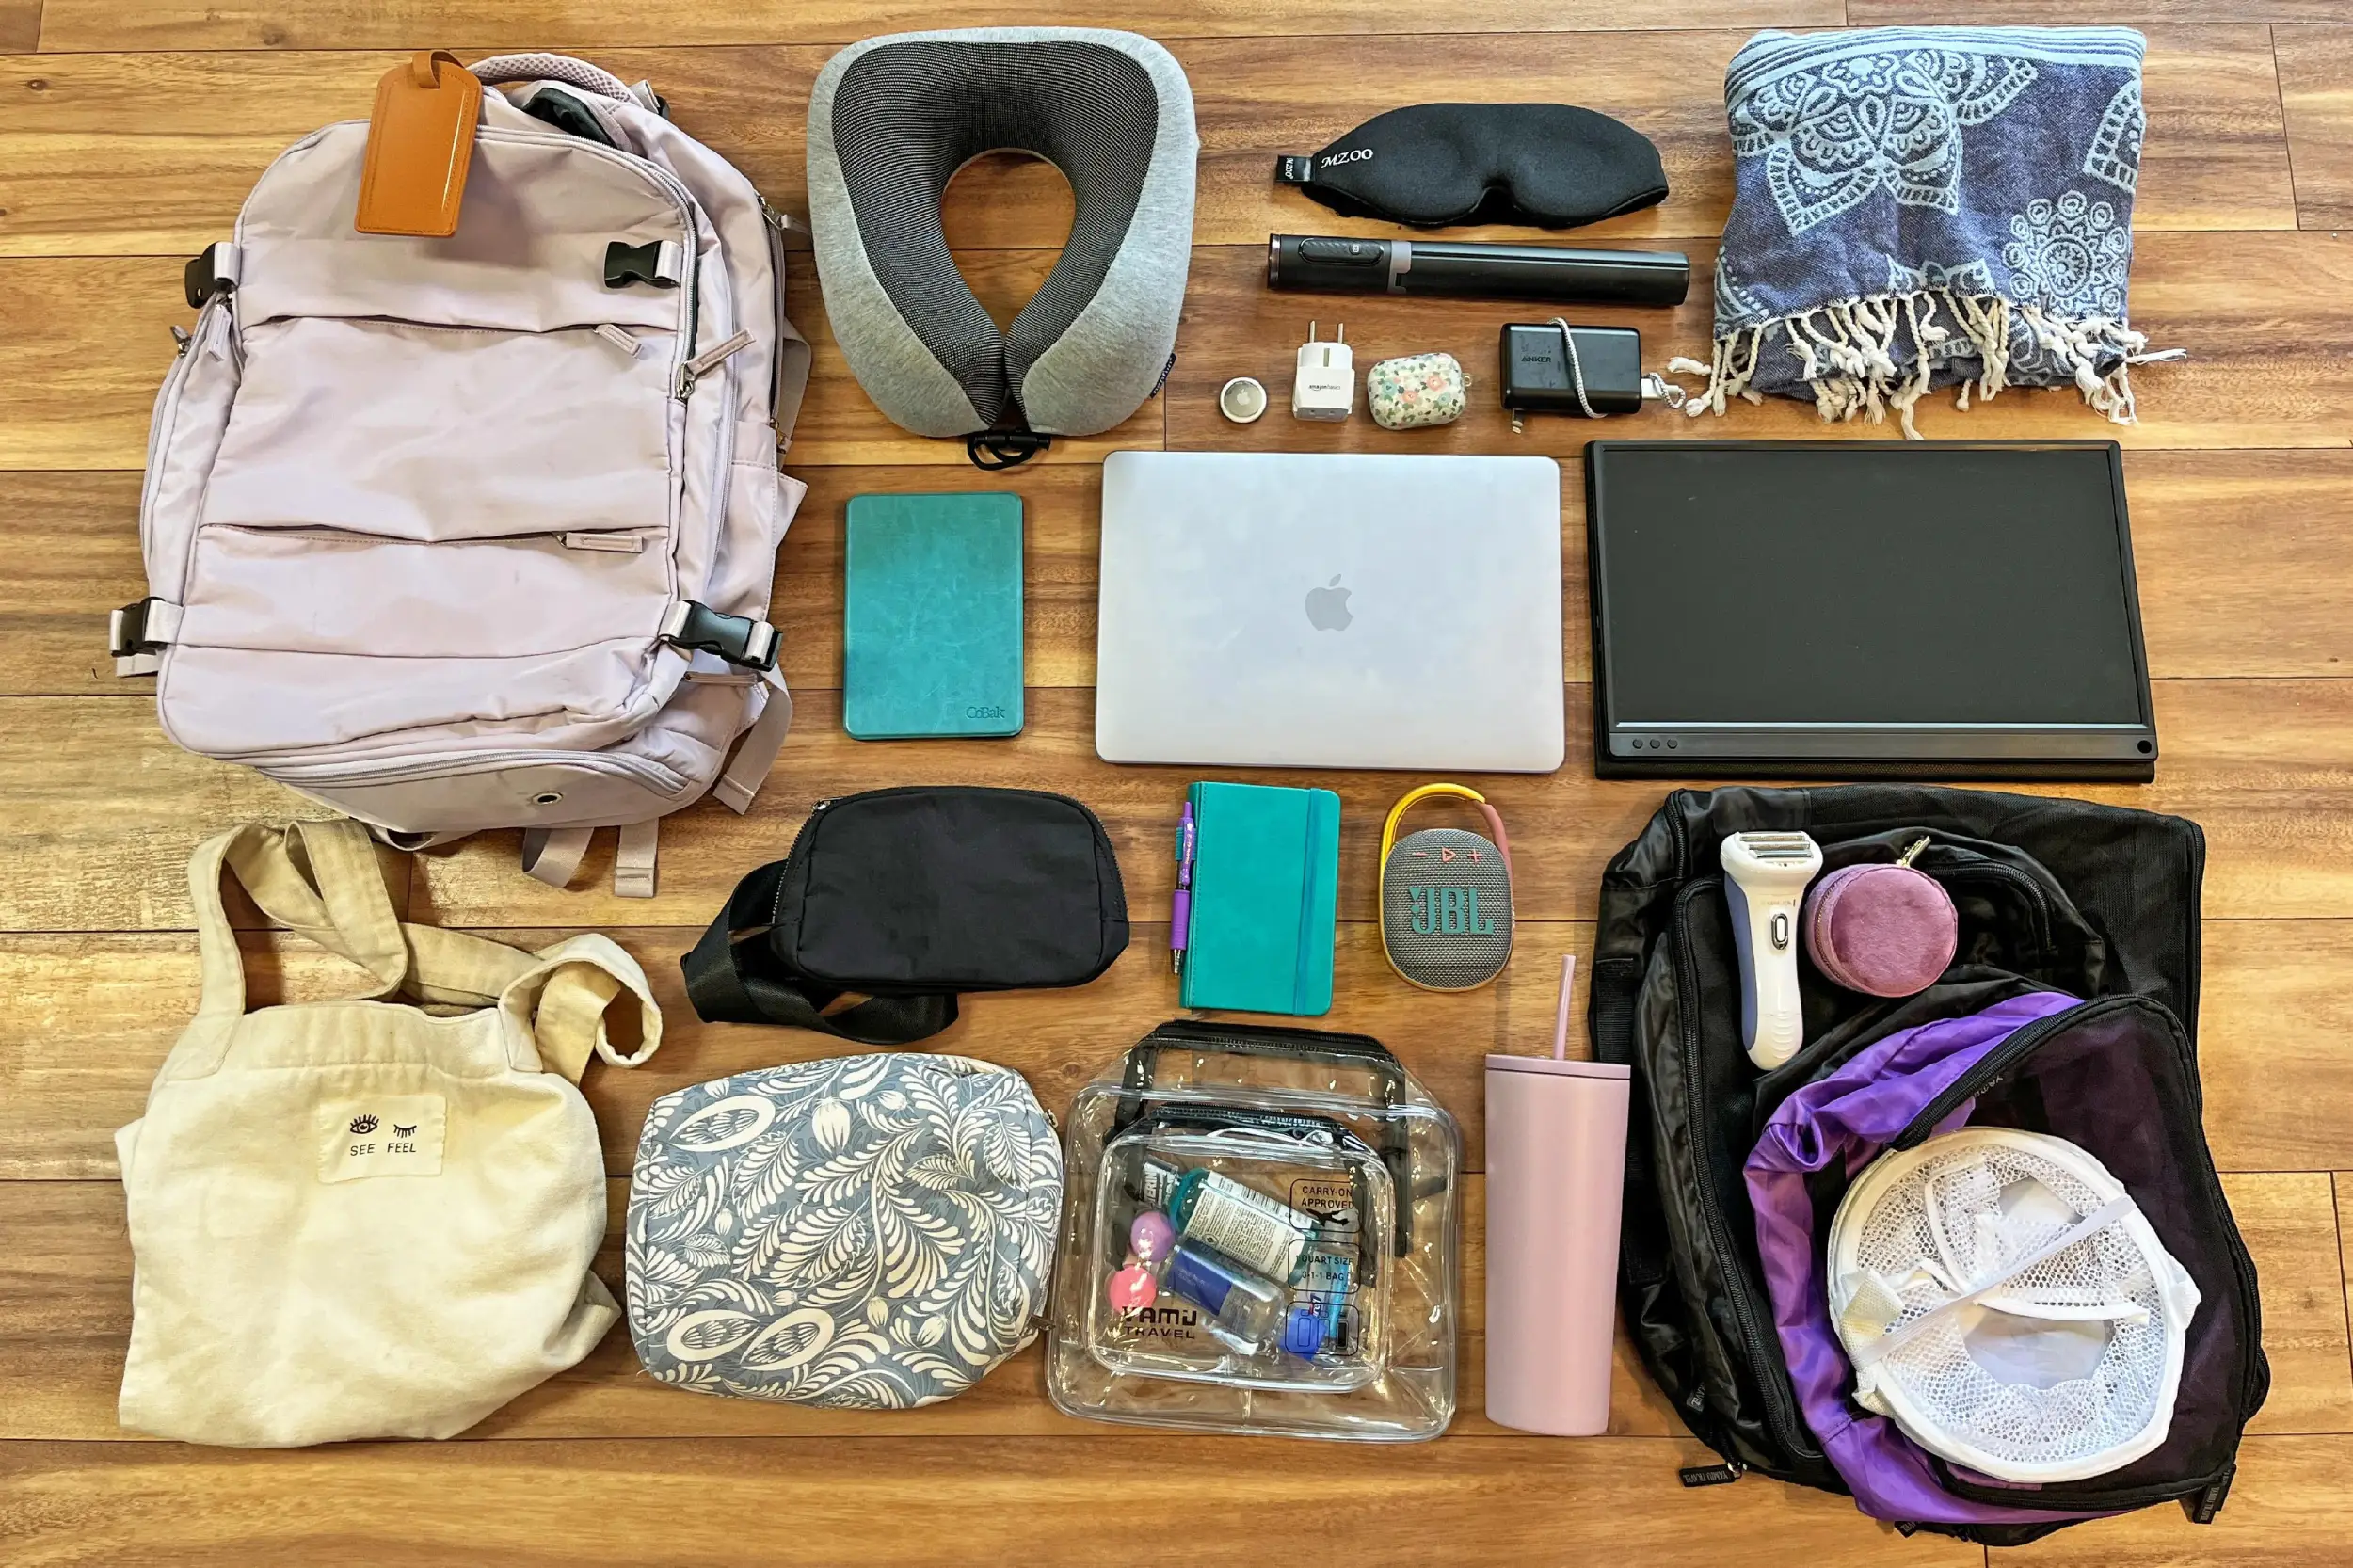 Digital nomad gear must-haves to pack, which help them to get work done while traveling long term.